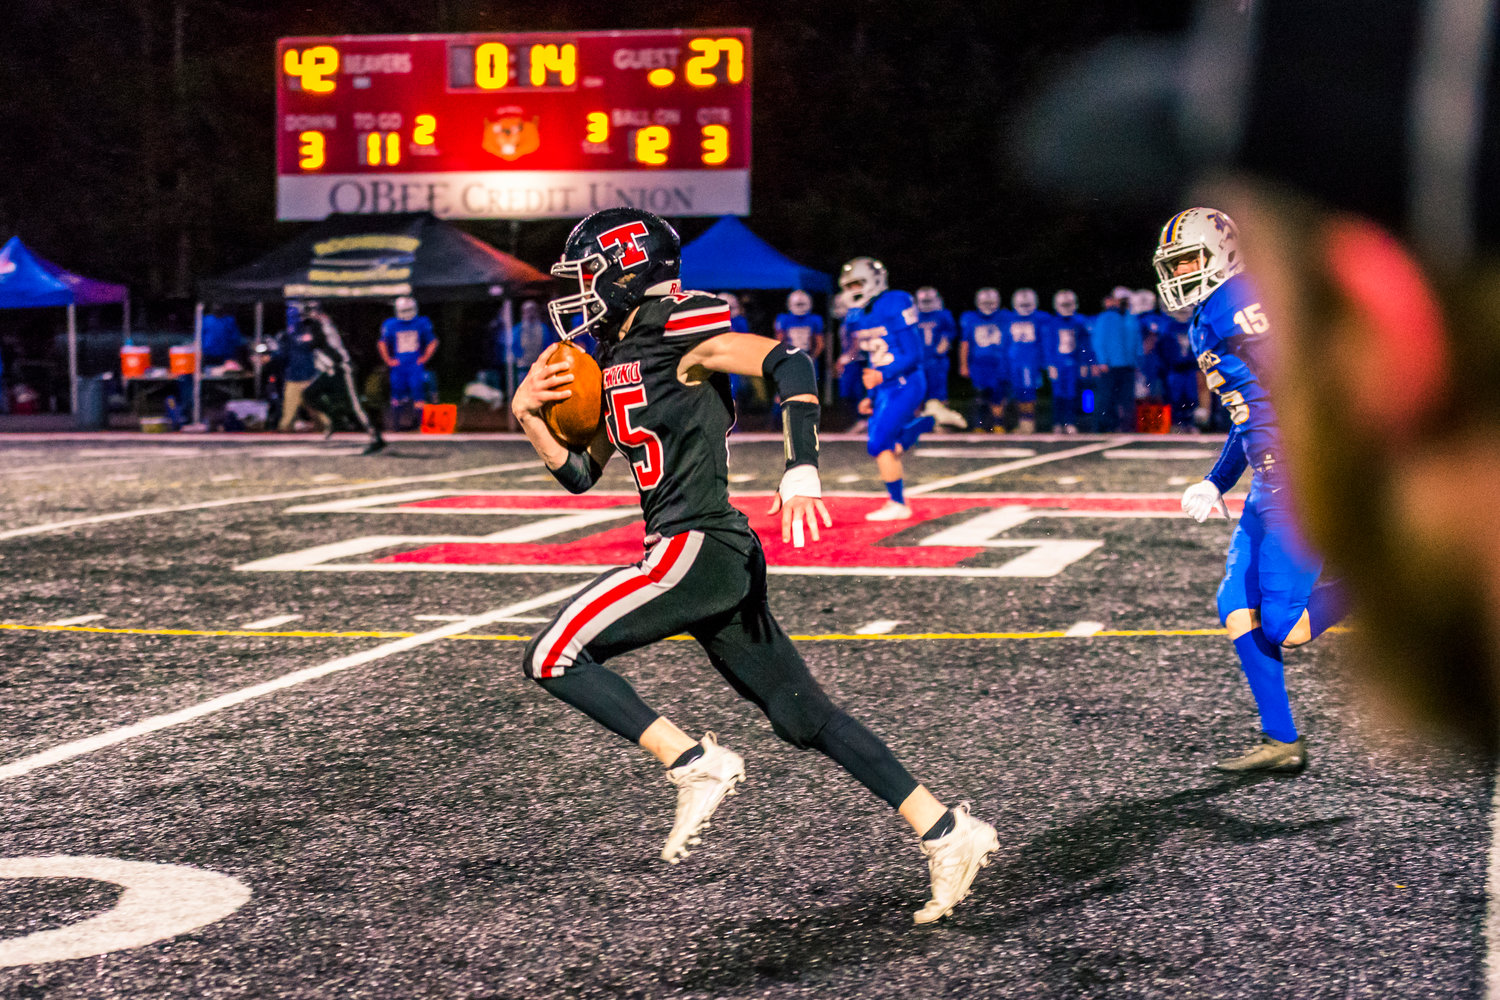 Tenino's William Tennihill (15) runs for a touchdown during a game against Rochester Friday night.